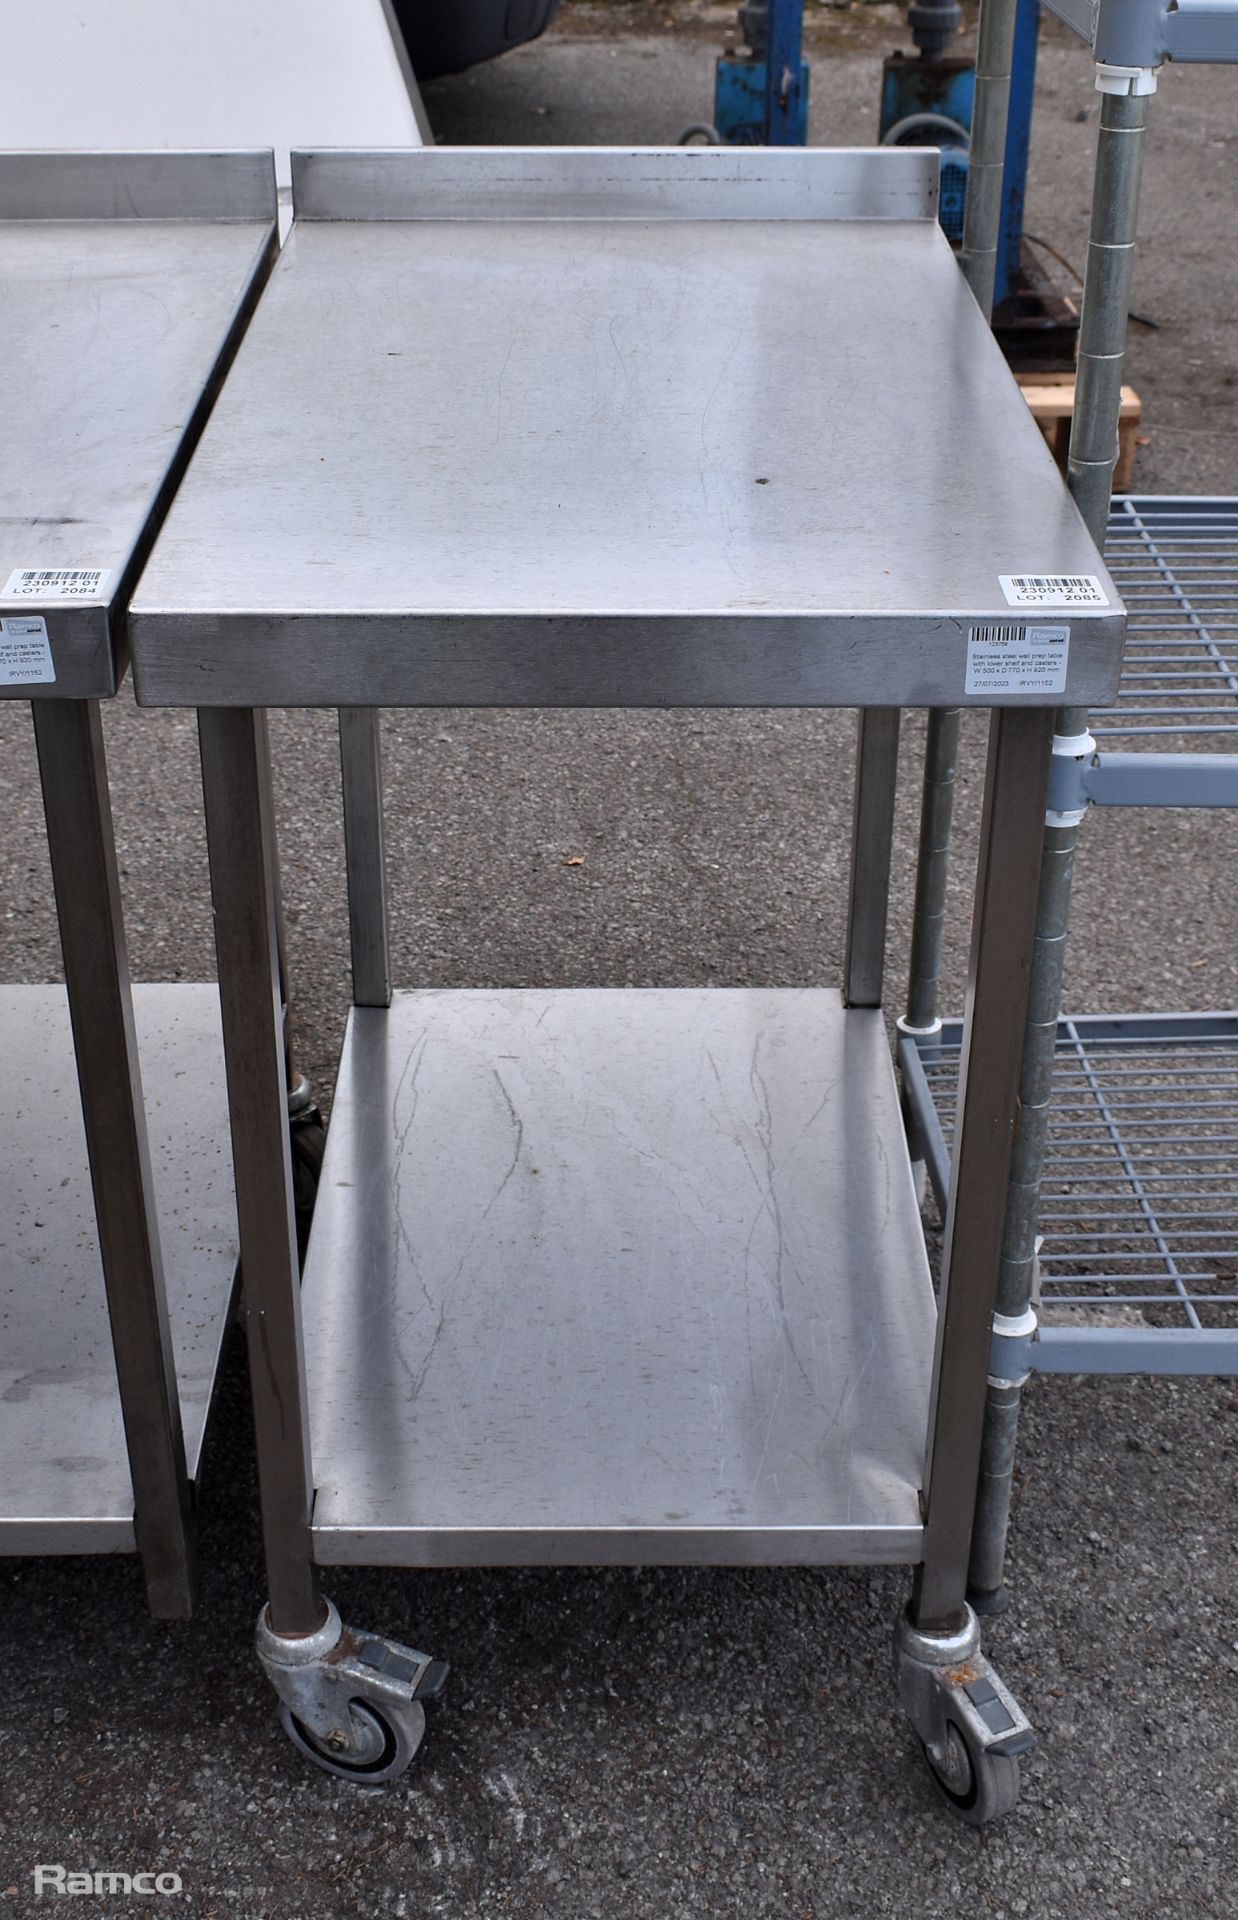 Stainless steel wall prep table with lower shelf and castors - W 500 x D 770 x H 920mm